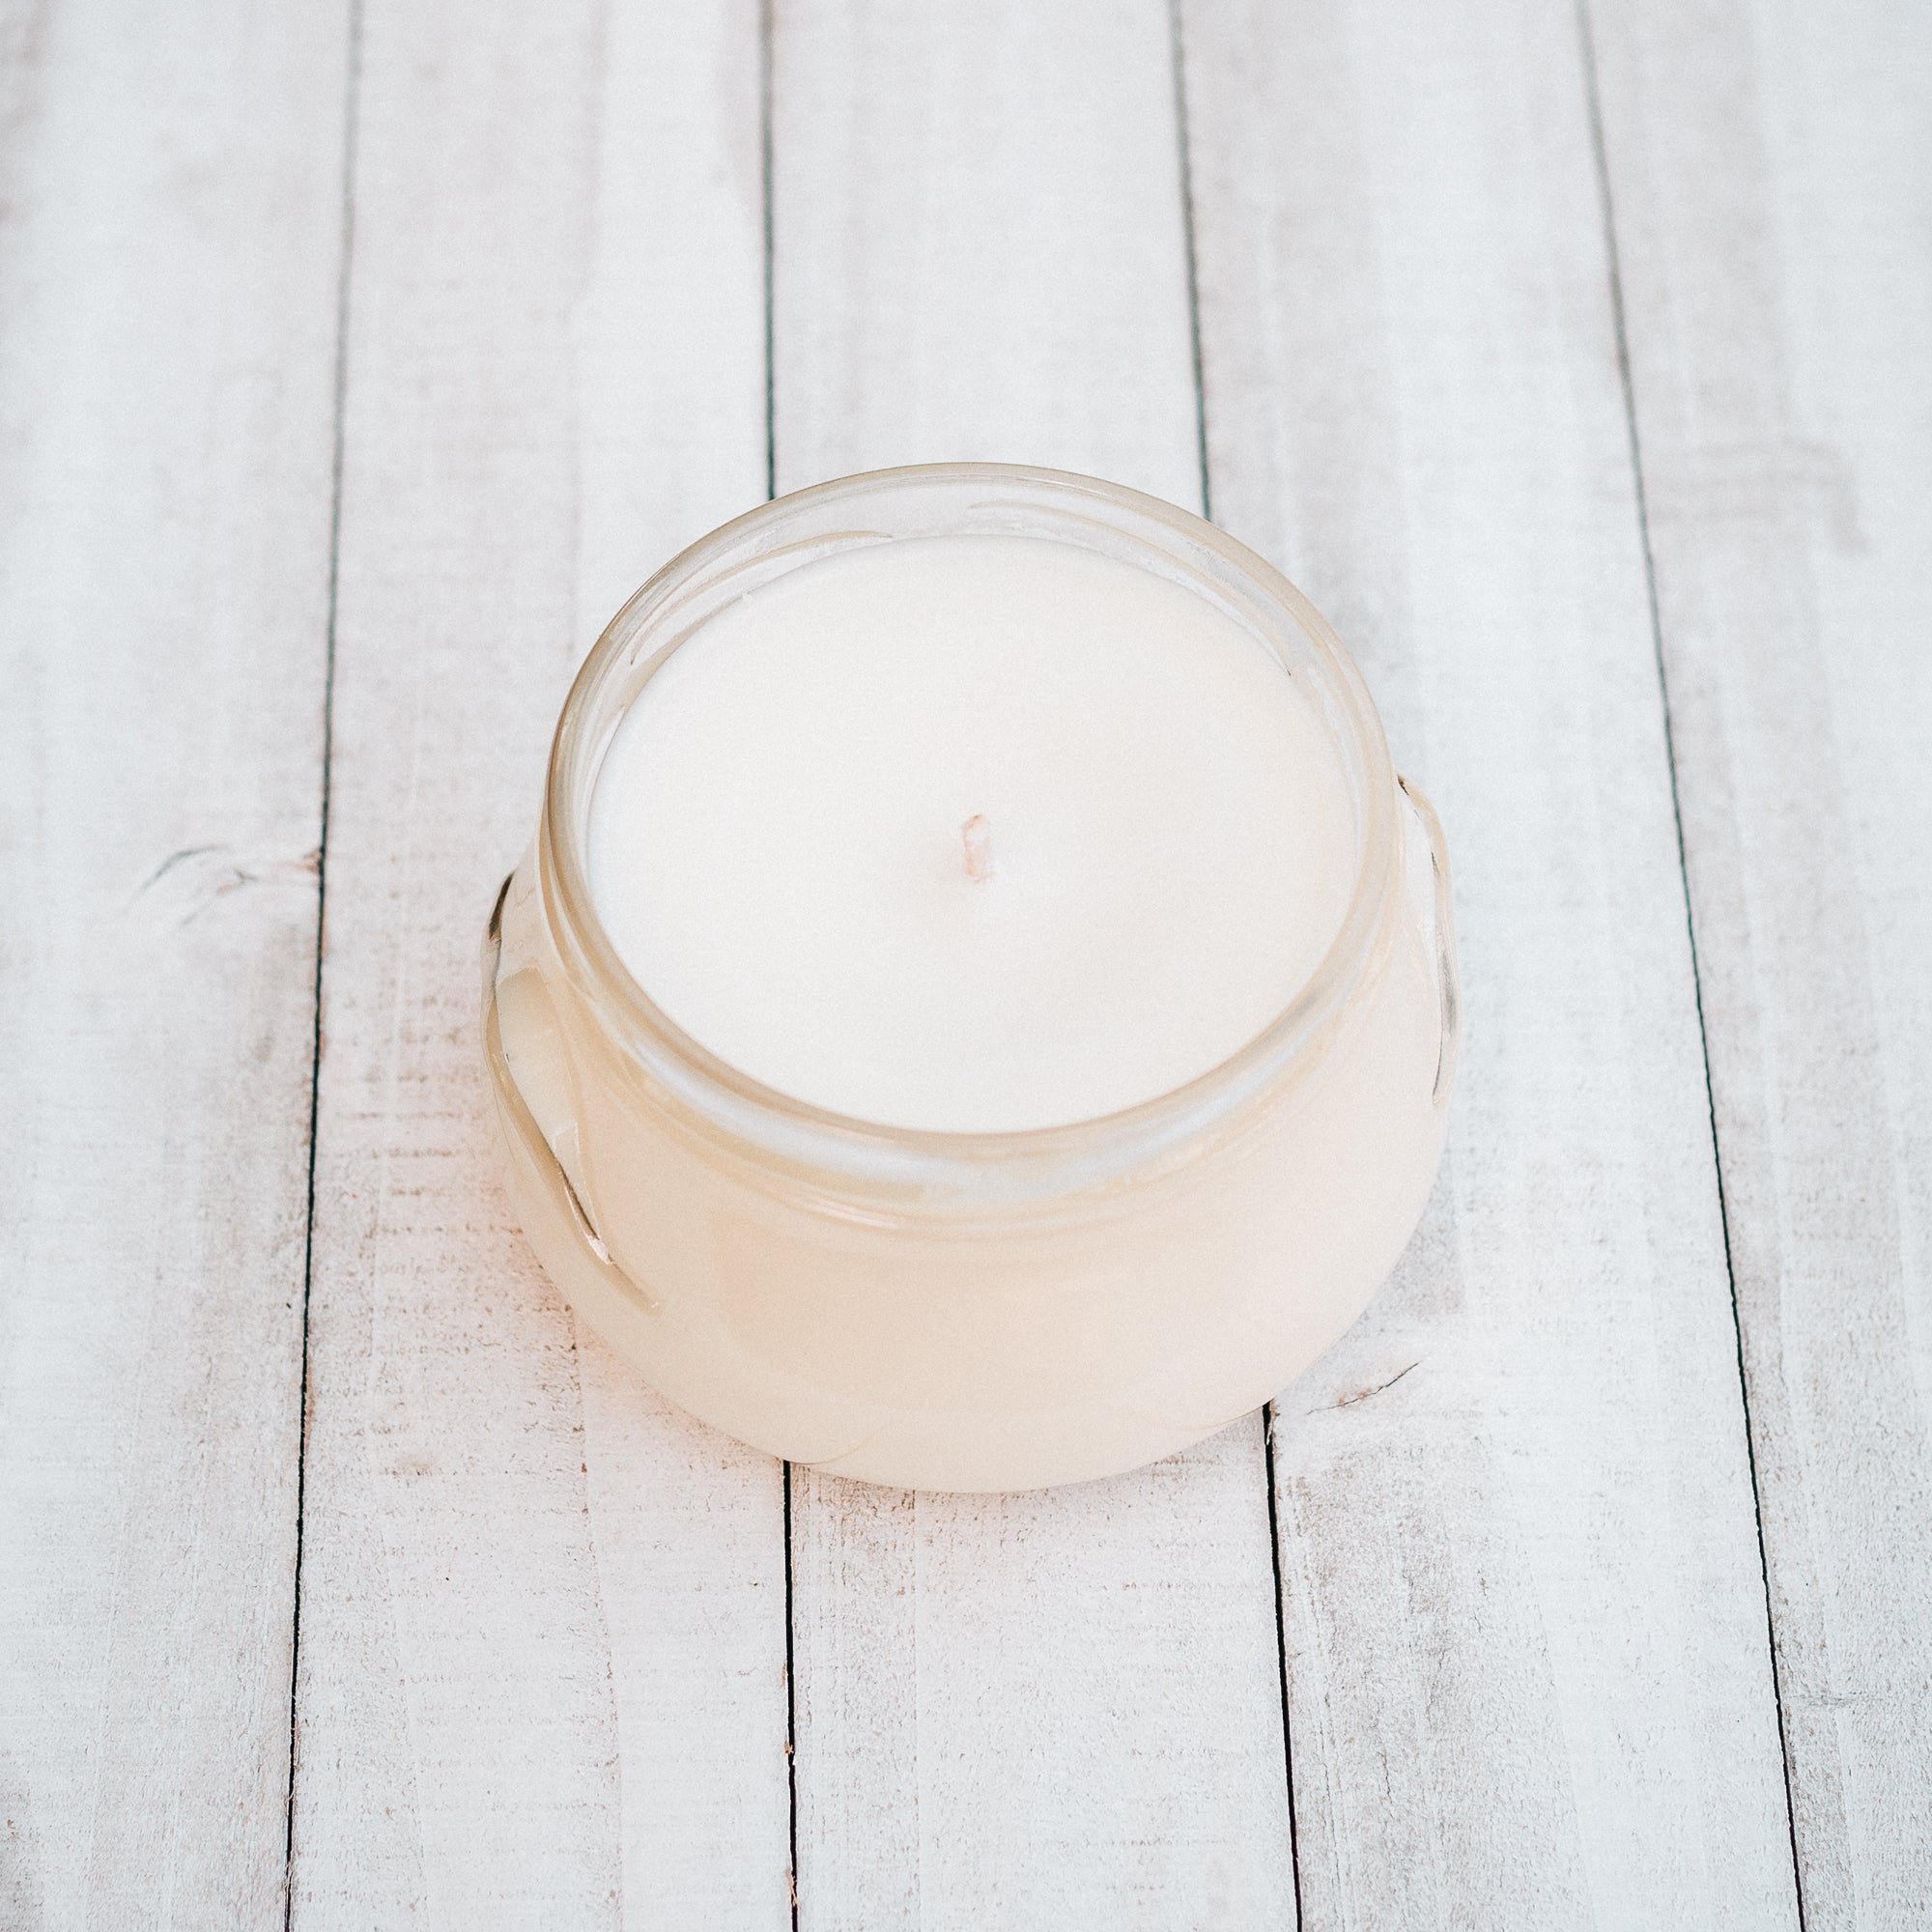 Cotton Winds 11 oz Candle